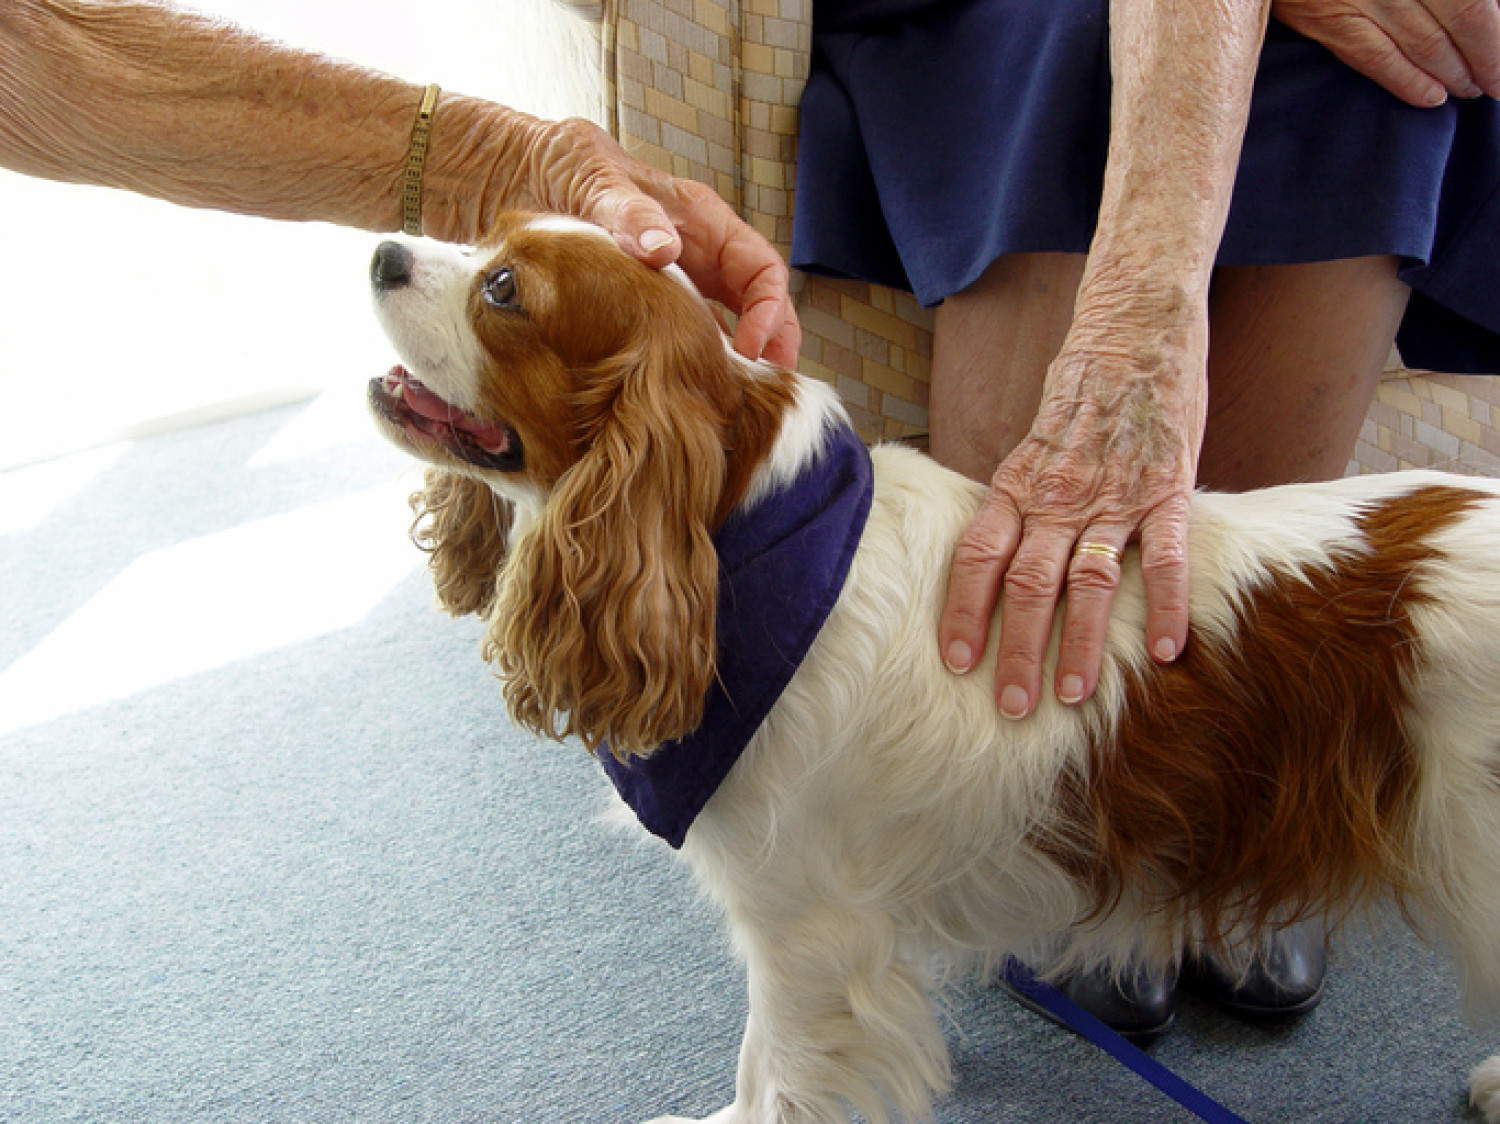 Elderly woman petting a King Charles Spaniel therapy dog in aaged care facility.